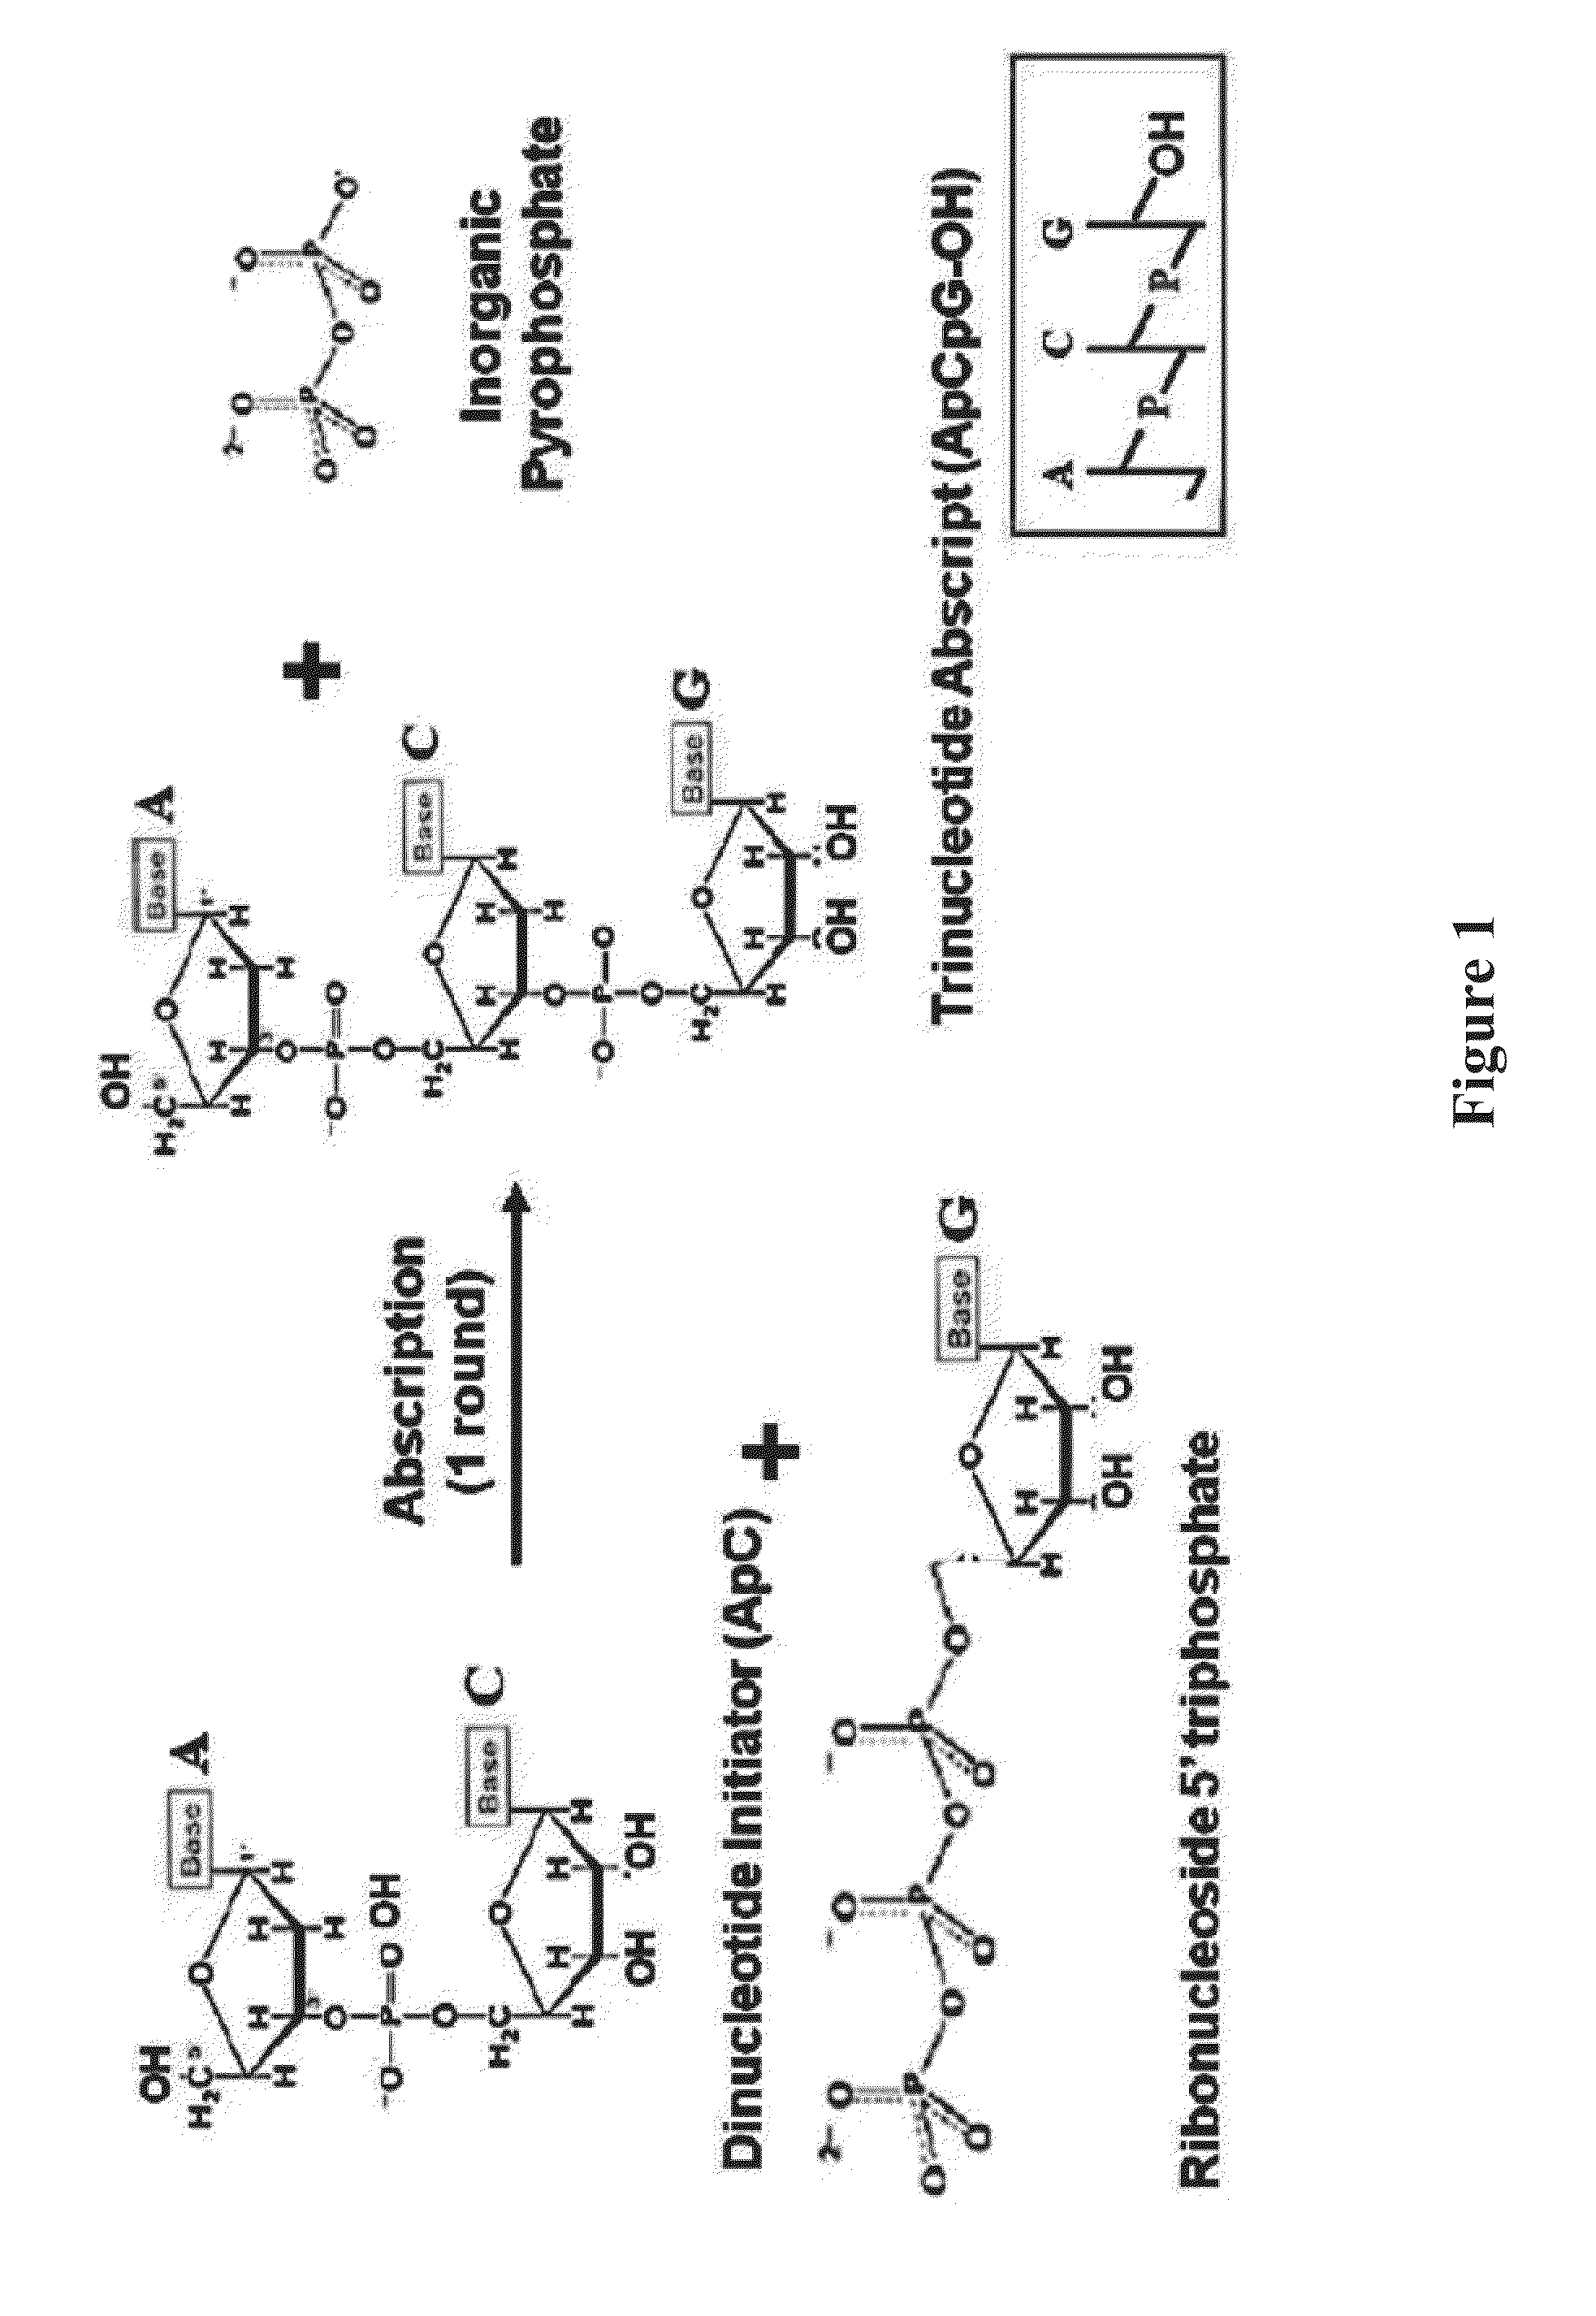 METHODS AND REAGENTS FOR DETECTING CpG METHYLATION WITH A METHYL CpG BINDING PROTEIN (MBP)